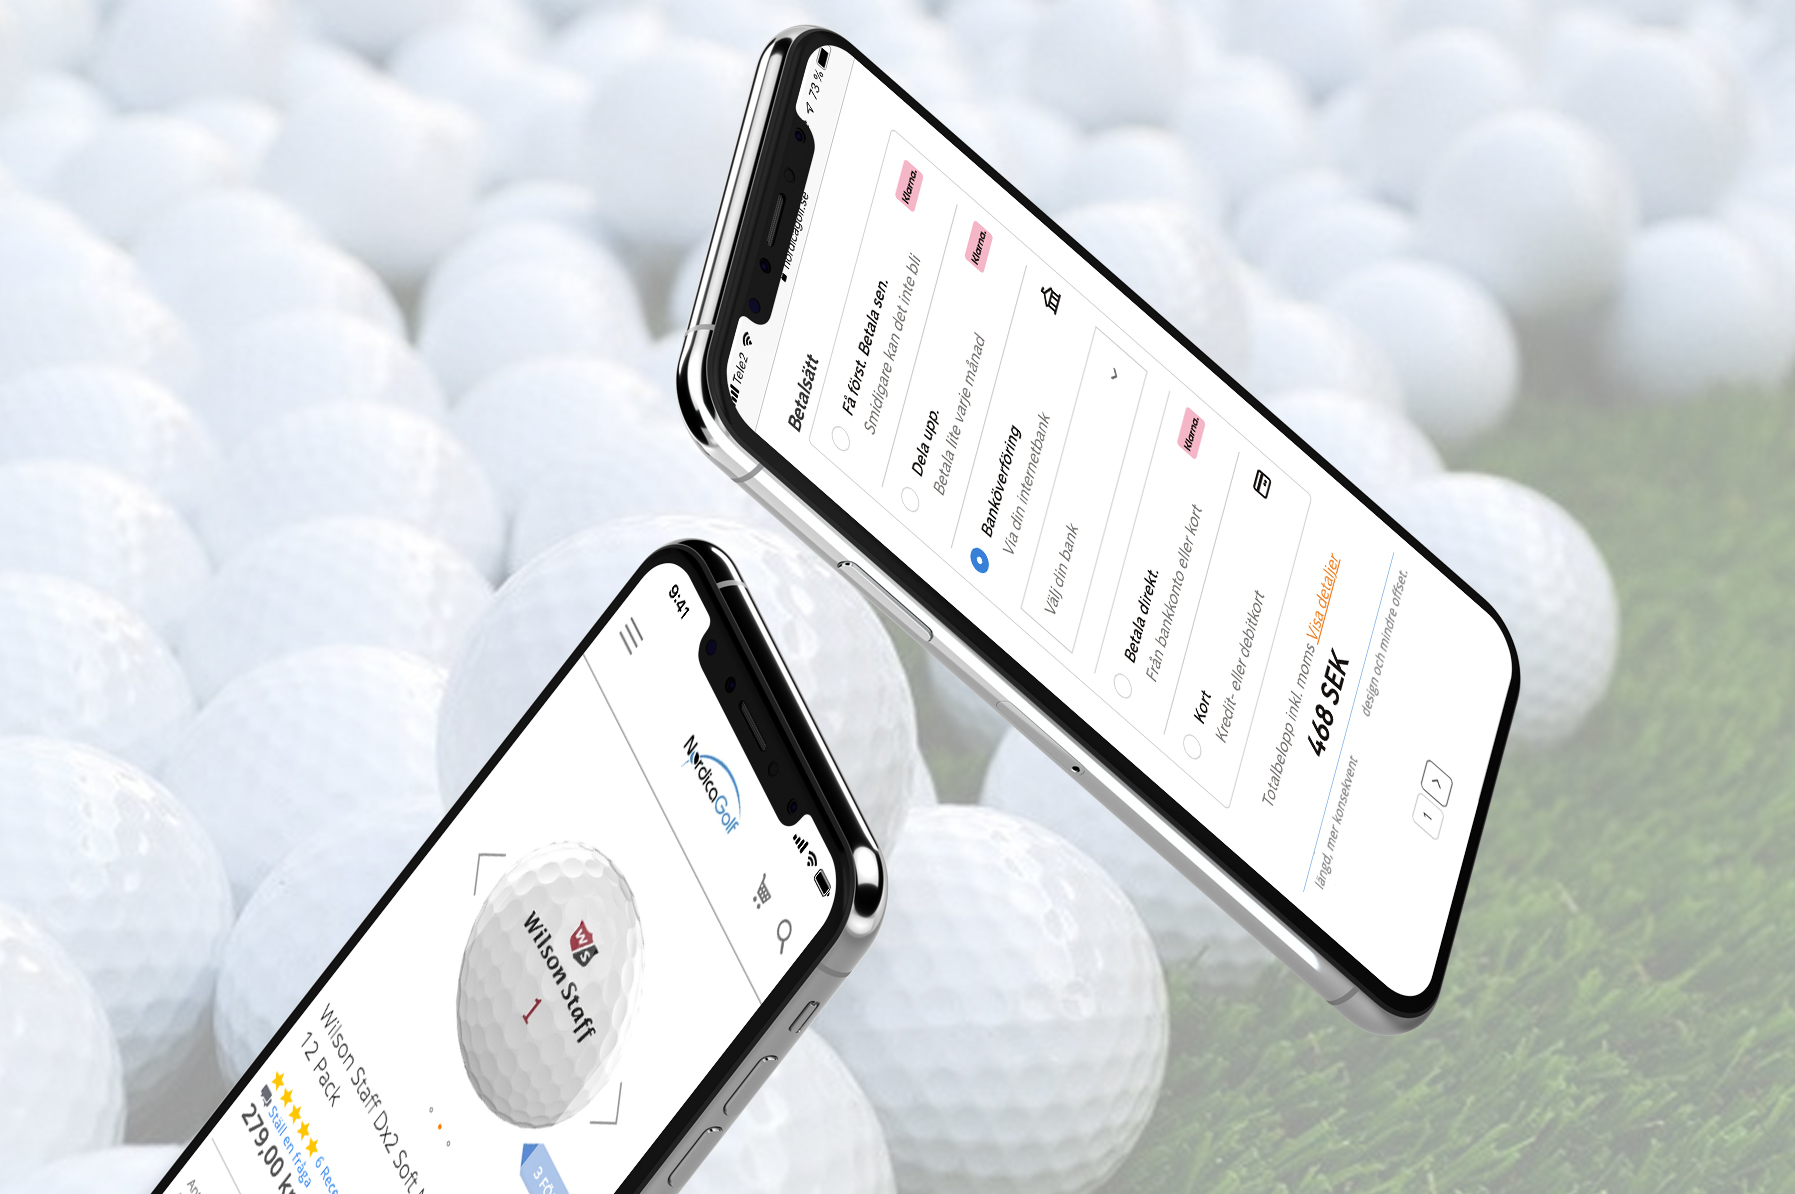 NordicaGolf Magento 2 Implementation by Vaimo and Klarna Smooth Checkout